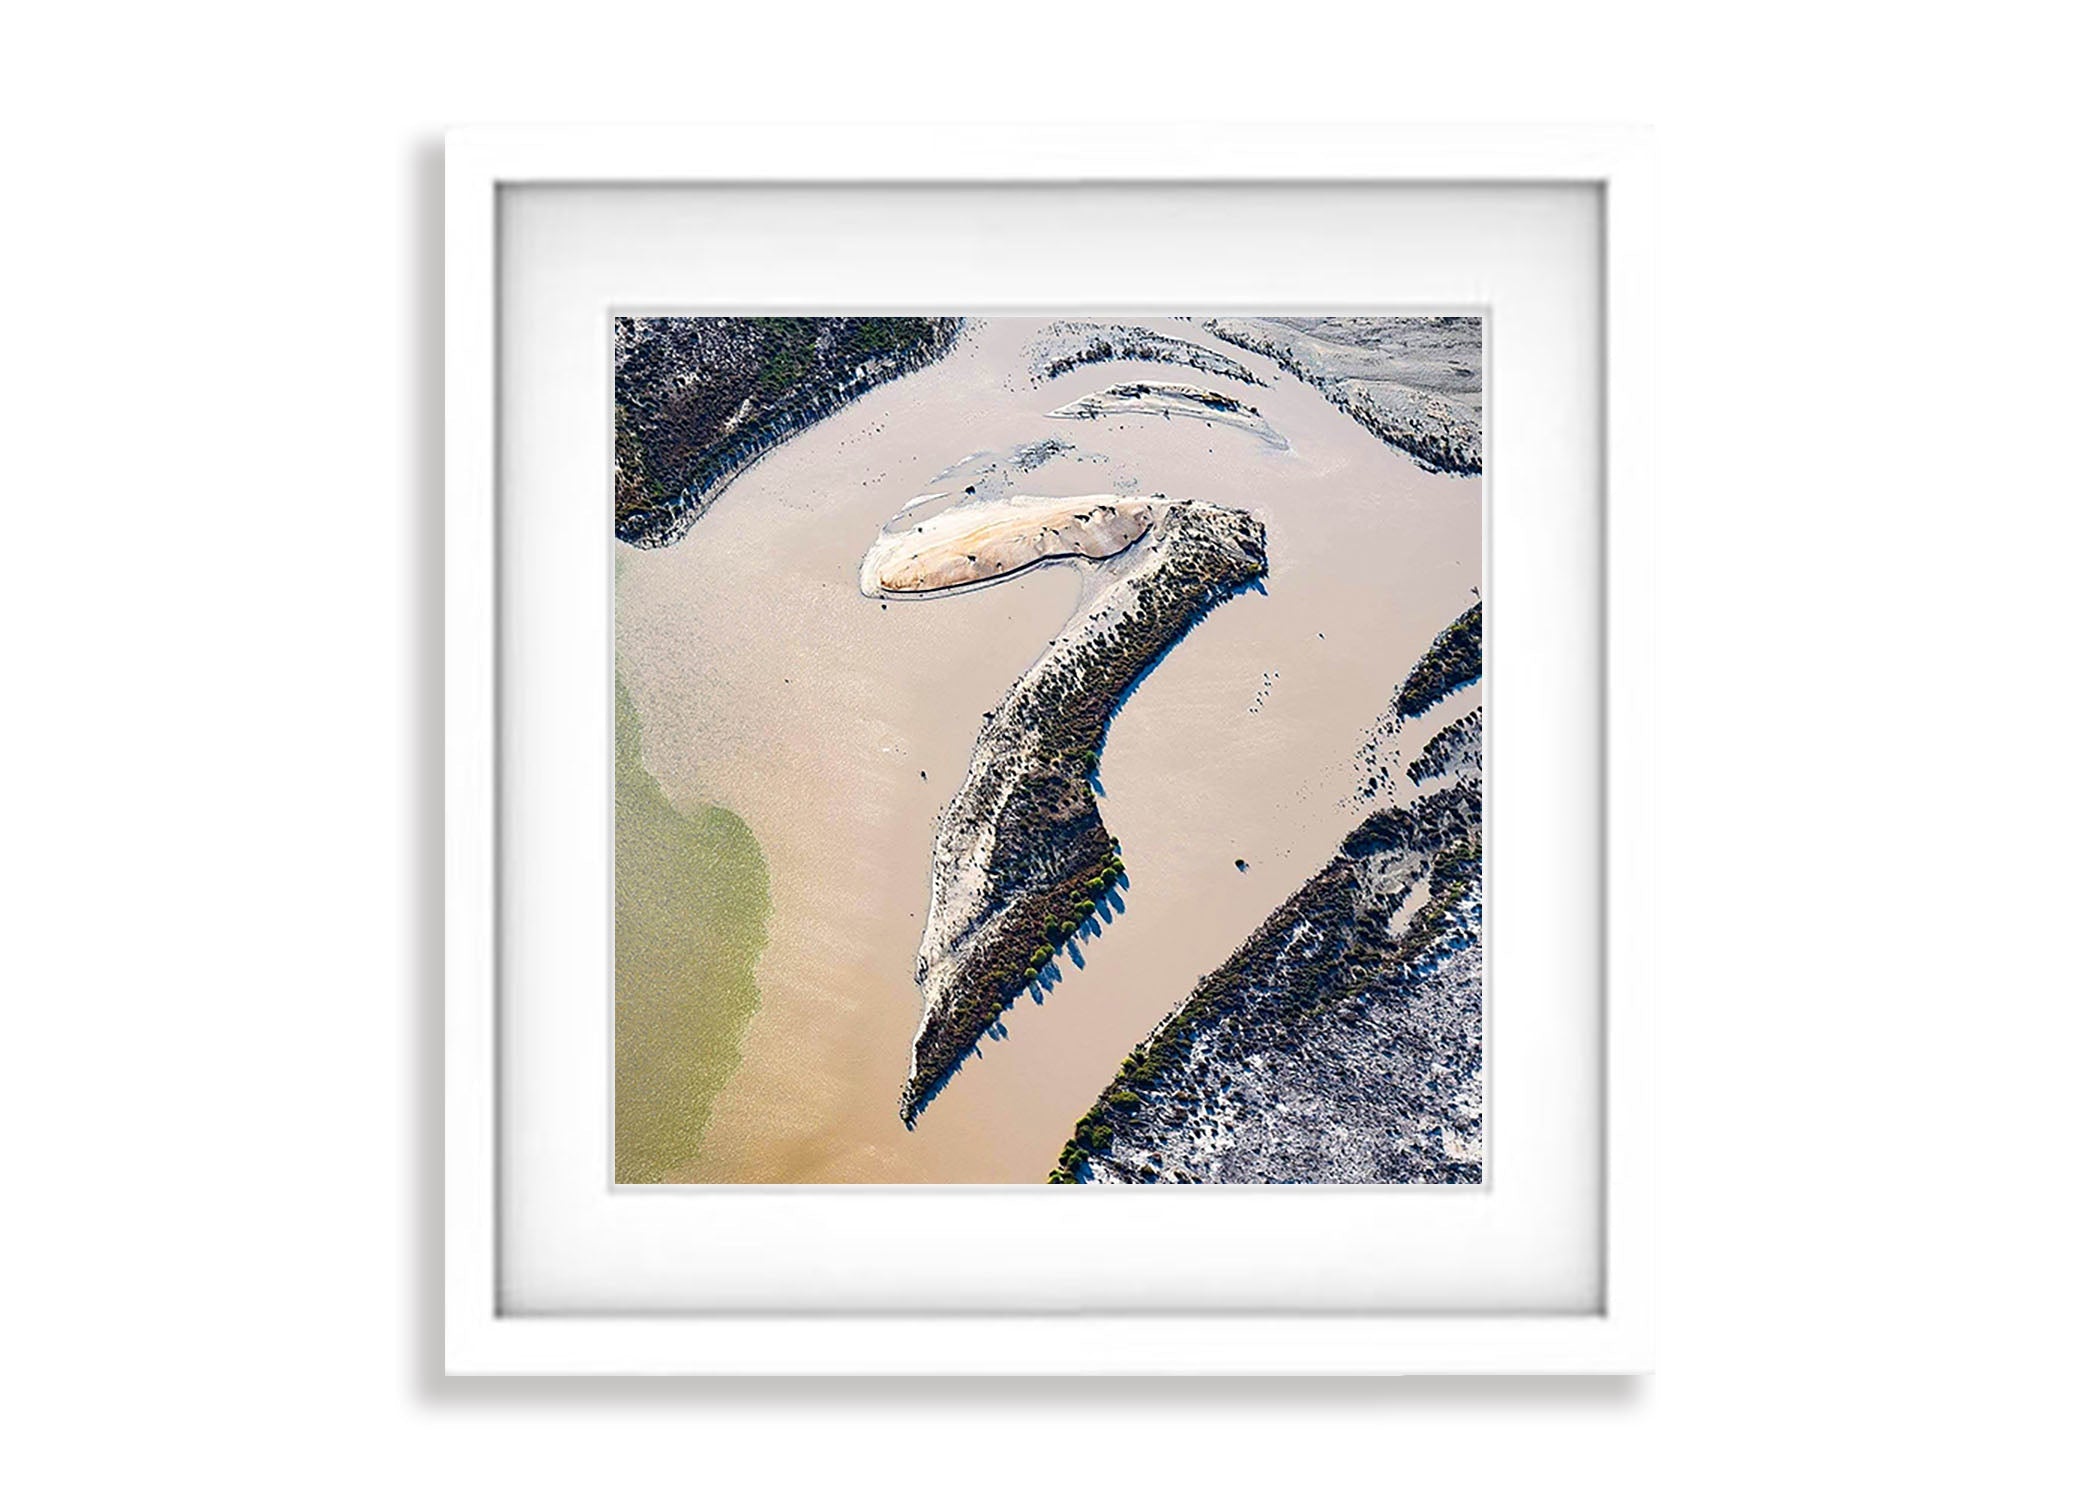 ARTWORK INSTOCK - 'Seven' - Available 150 x 150cms Mounted Print (ready to frame) in the gallery TODAY!